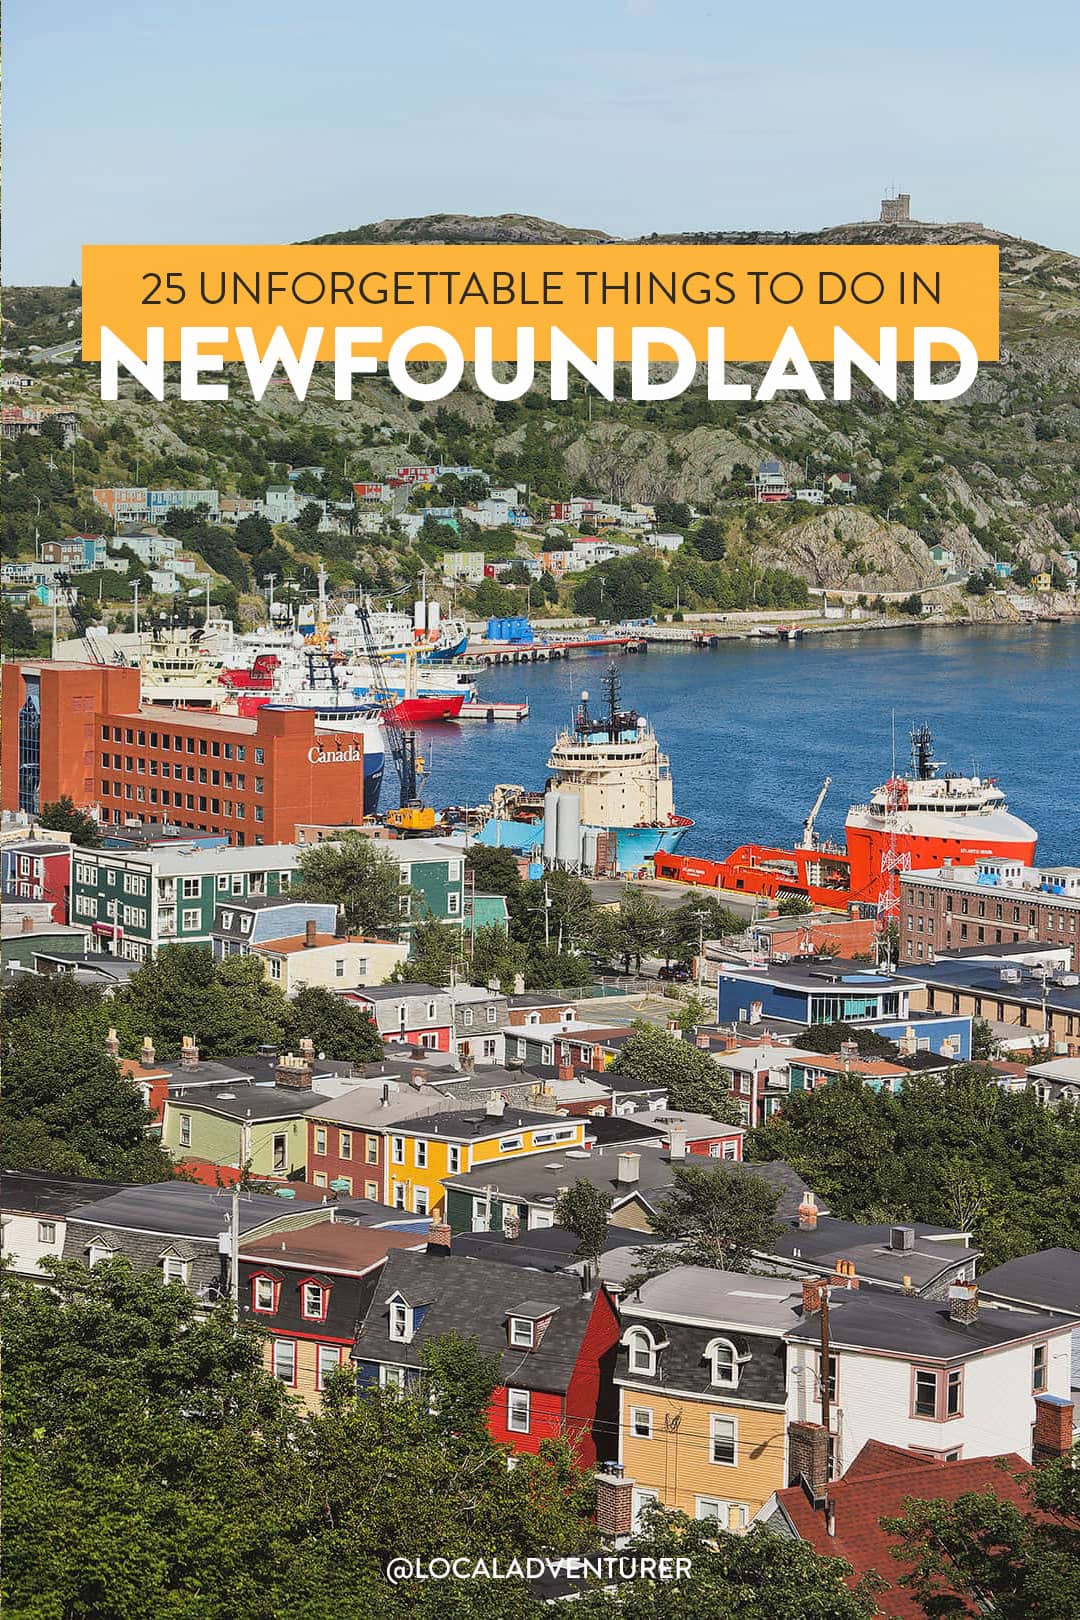 Do you need a car in st johns newfoundland?